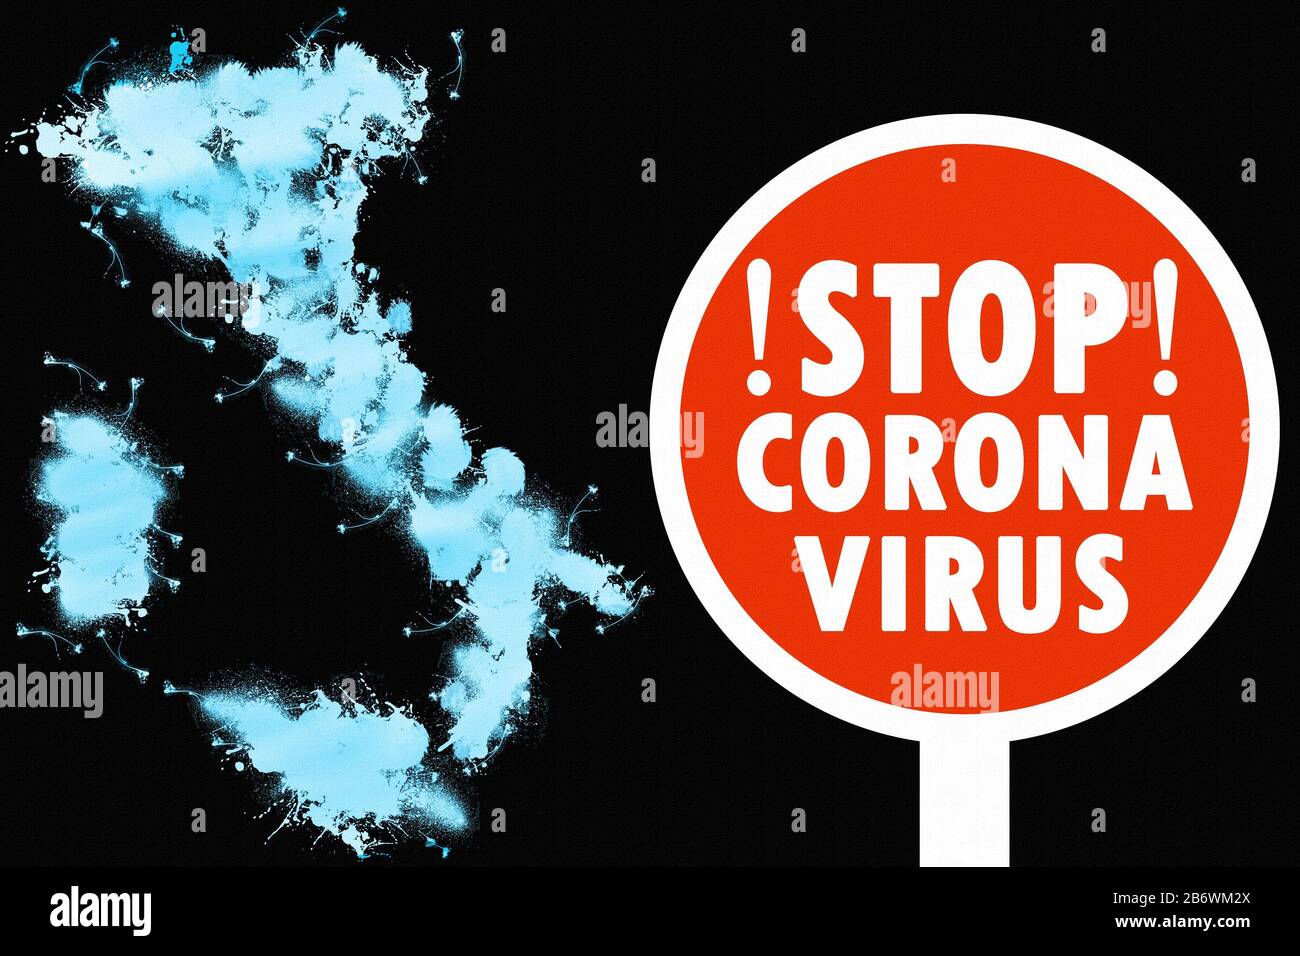 Italy on lockdown over Covid 19 - The Coronavirus in Italy has stepped up a lockdown that has already stopped its normally busy city streets. Stock Photo